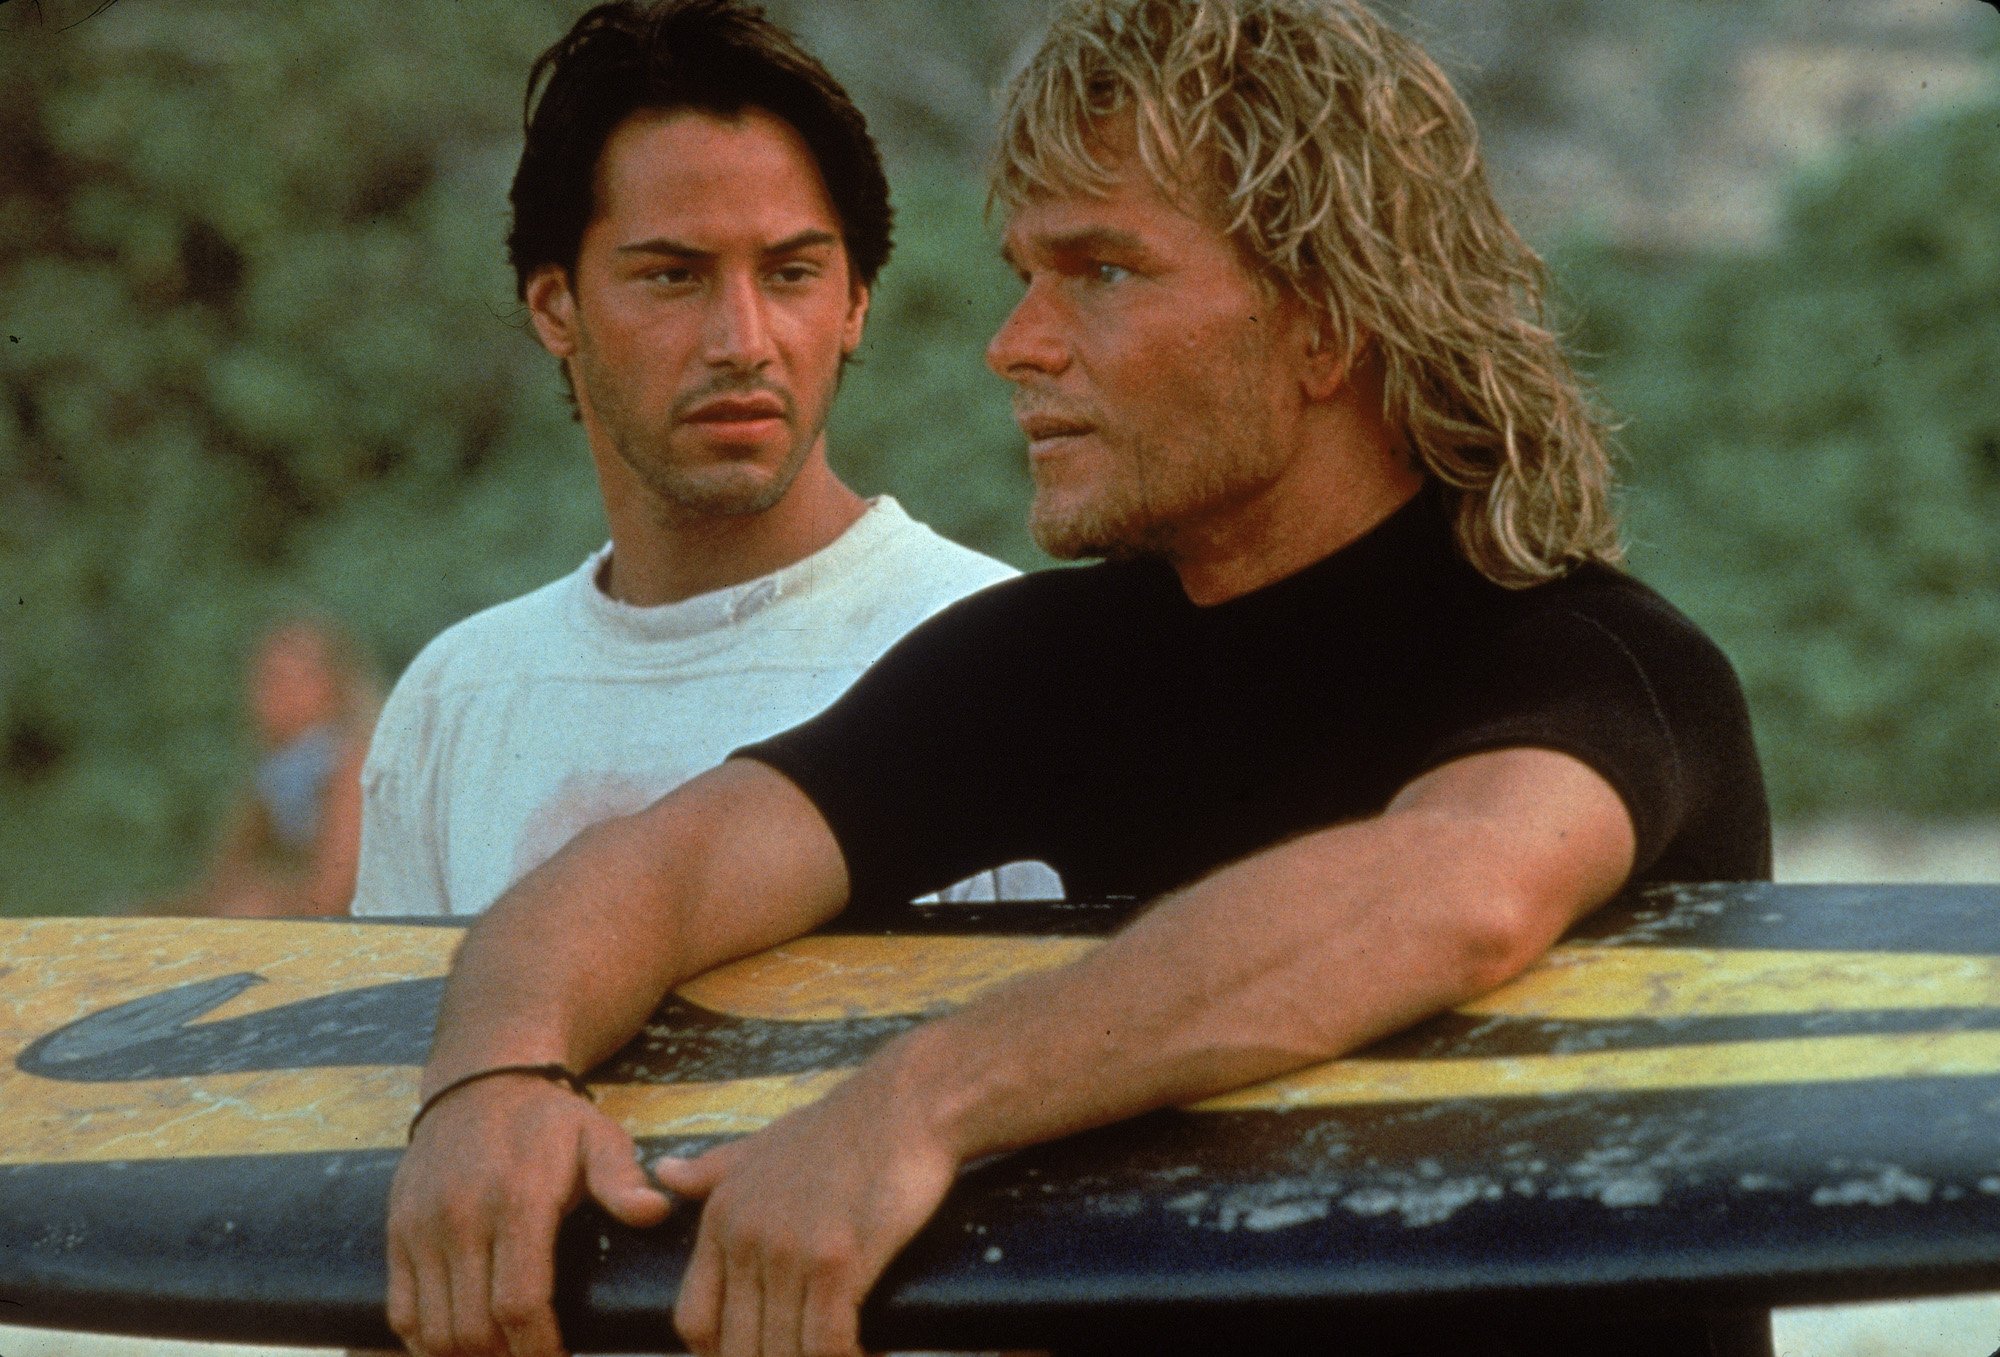 Patrick Swayze holds a surf board on the beach with Keanu Reeves and would've made 'Point Break 2'